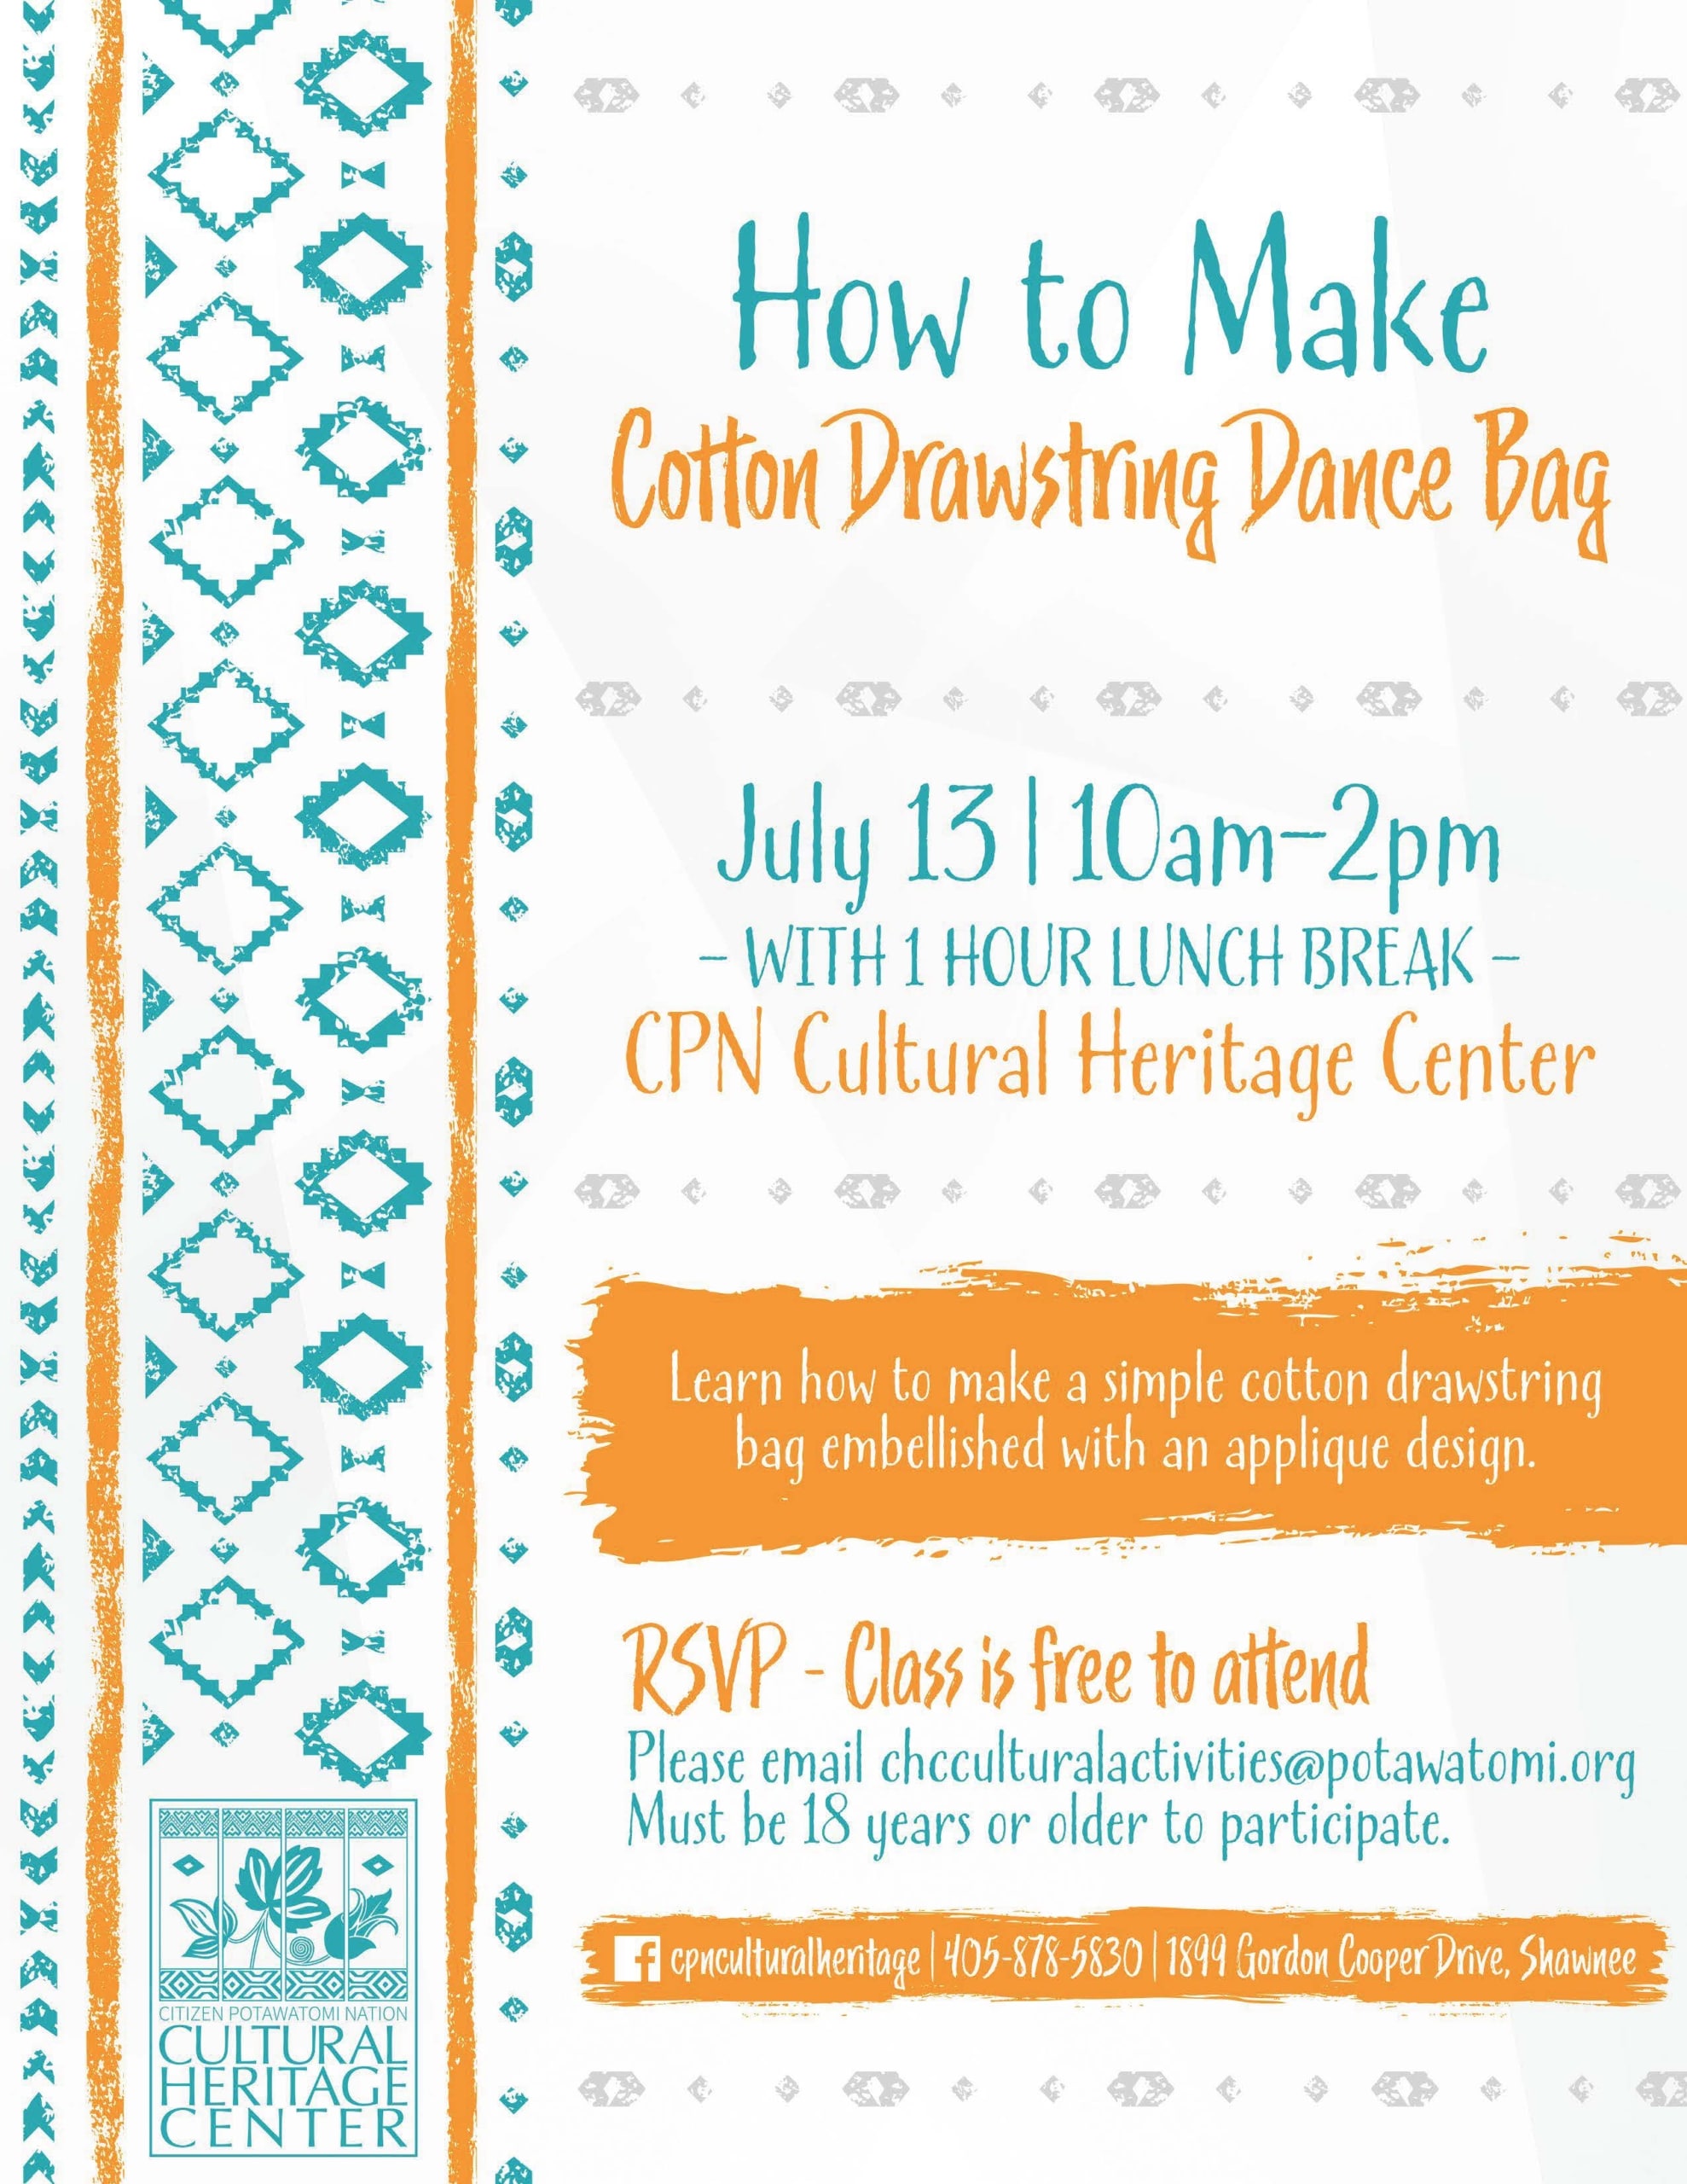 Cotton Drawstring Class at CPN Cultural Heritage Center